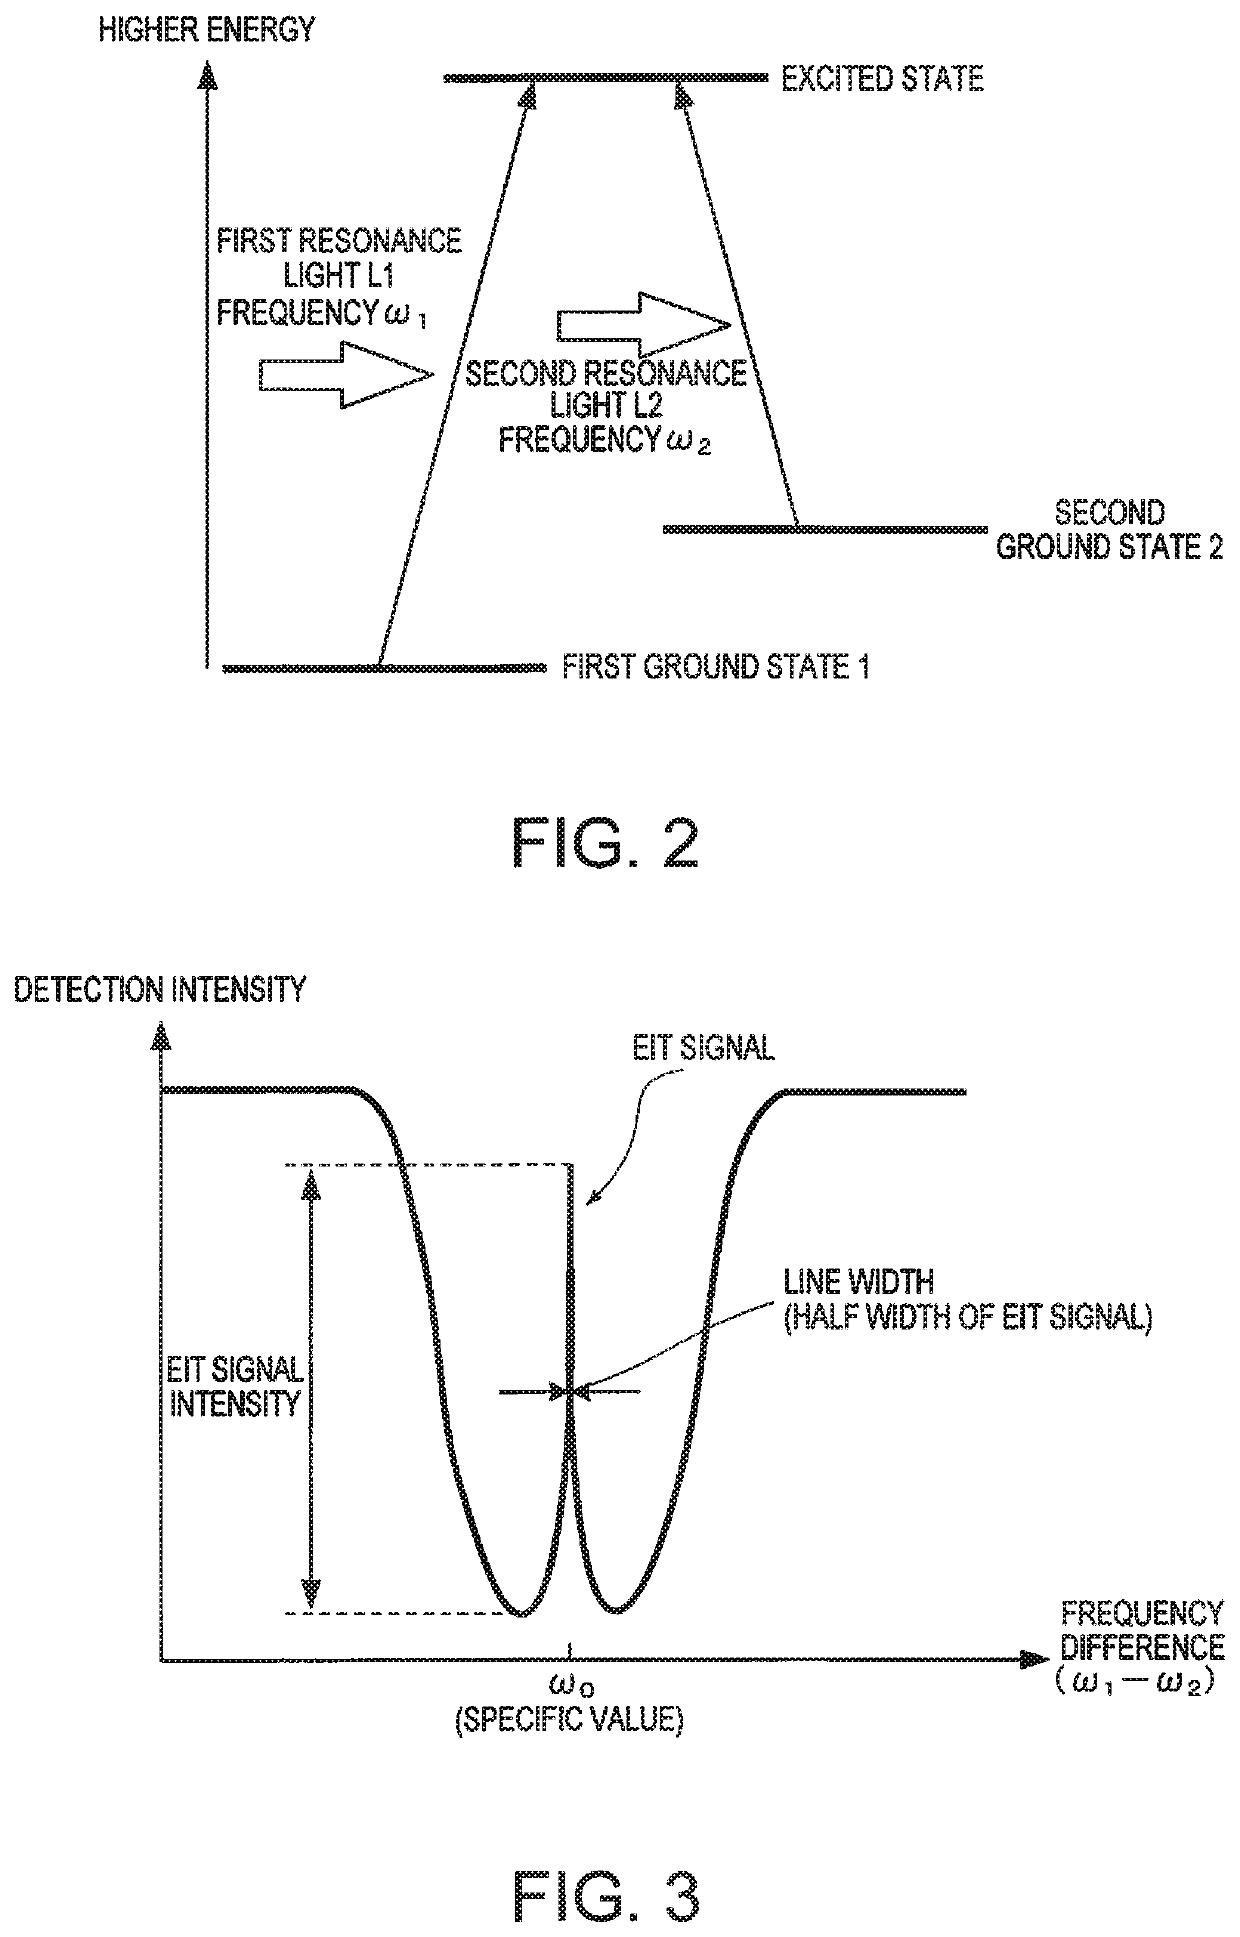 Atomic oscillator and frequency signal generation system